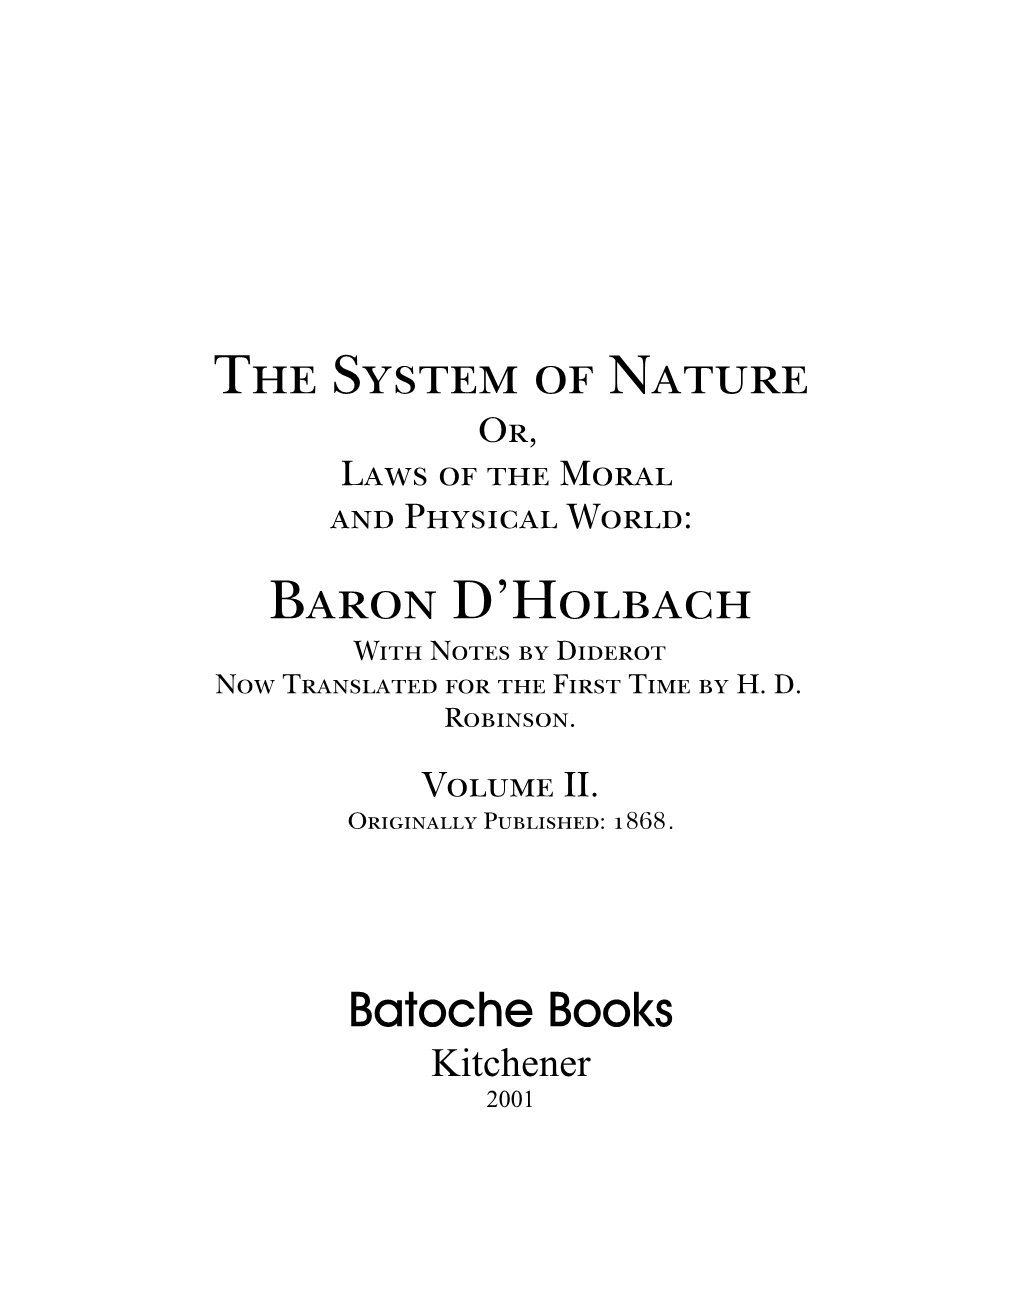 System of Nature Volume 2